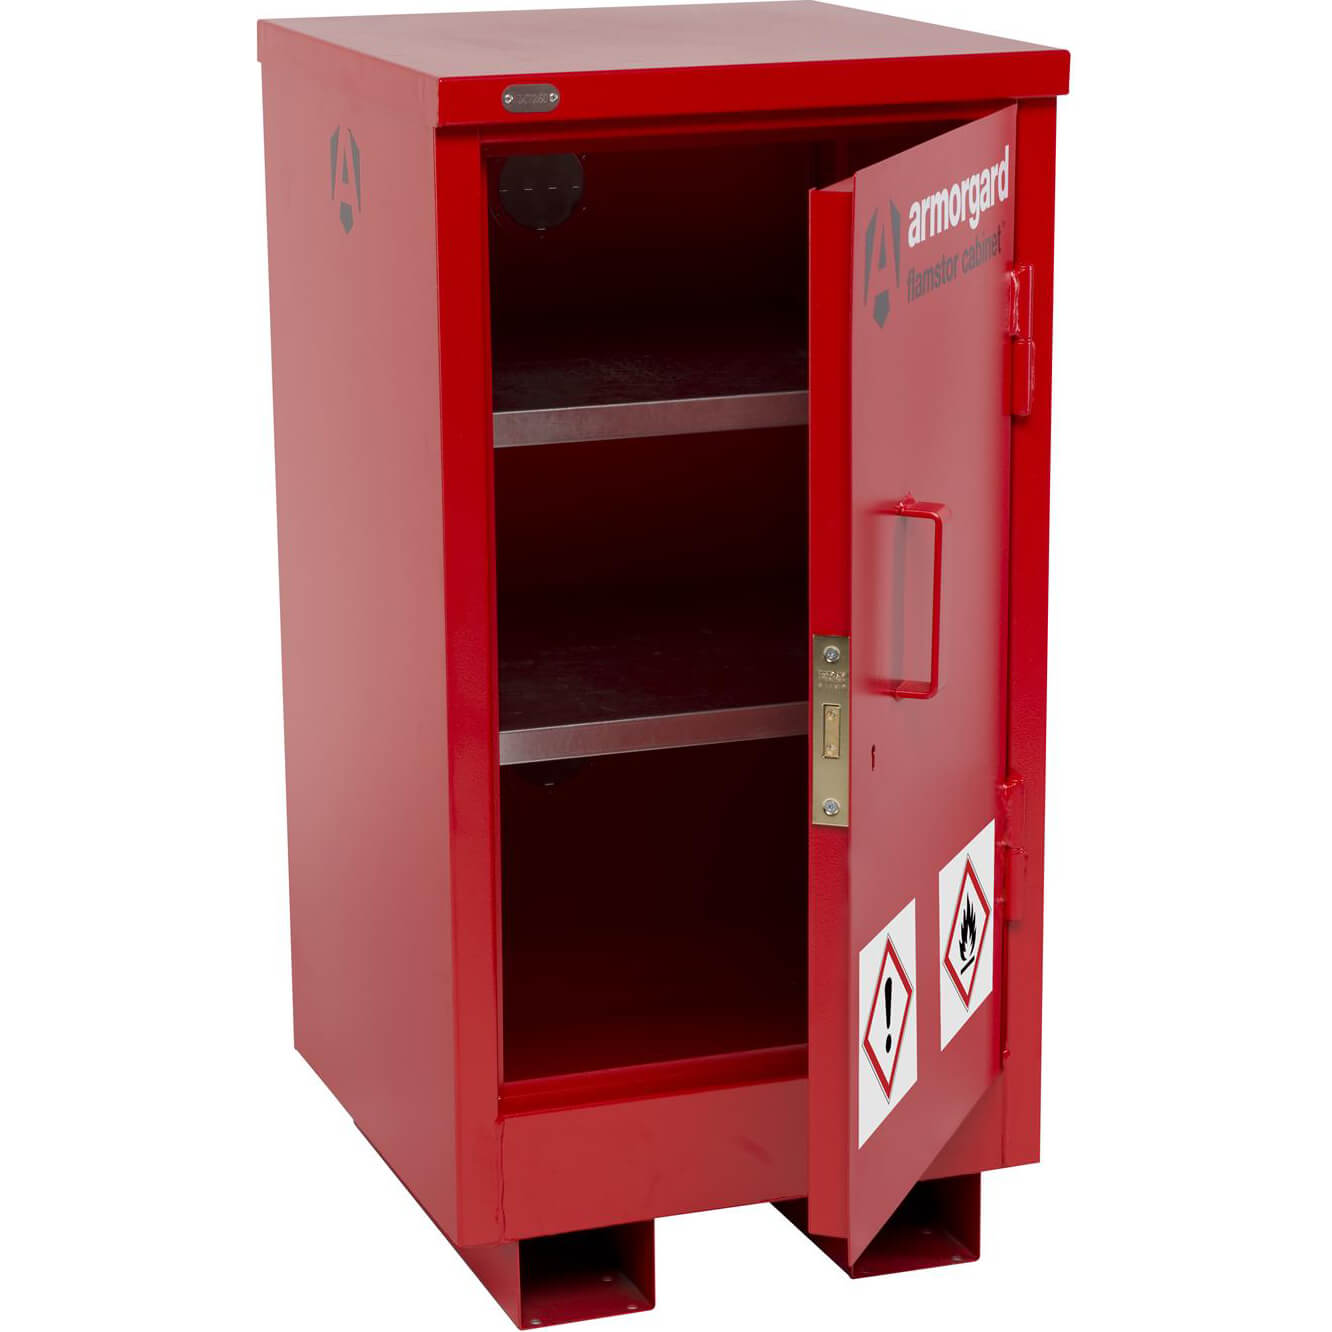 Image of Armorgard Flamstor Chemical and Flammables Hazardous Cabinet 2500mm 750mm 2300mm